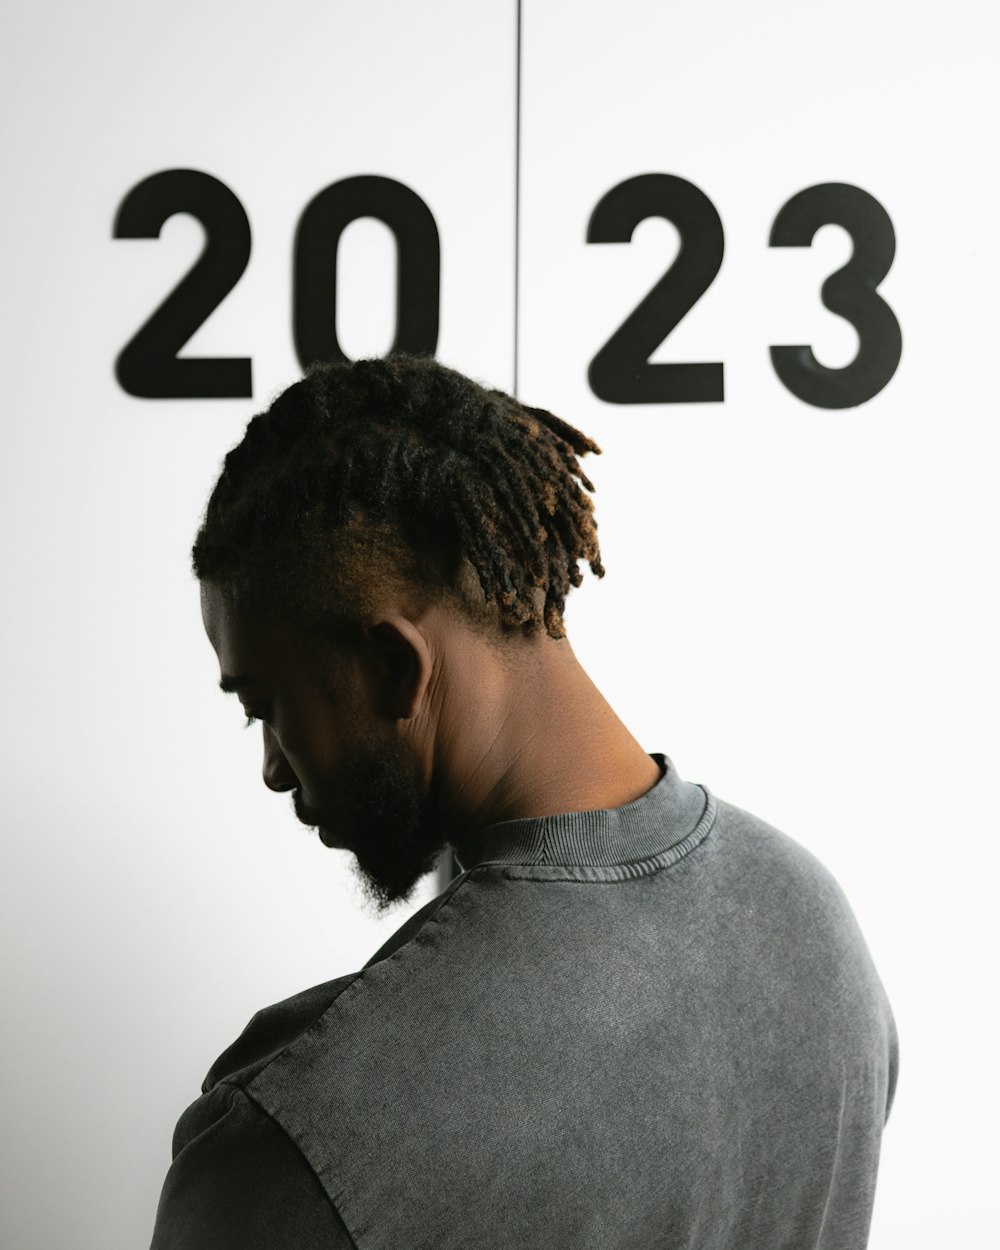 a man with dreadlocks standing in front of a wall